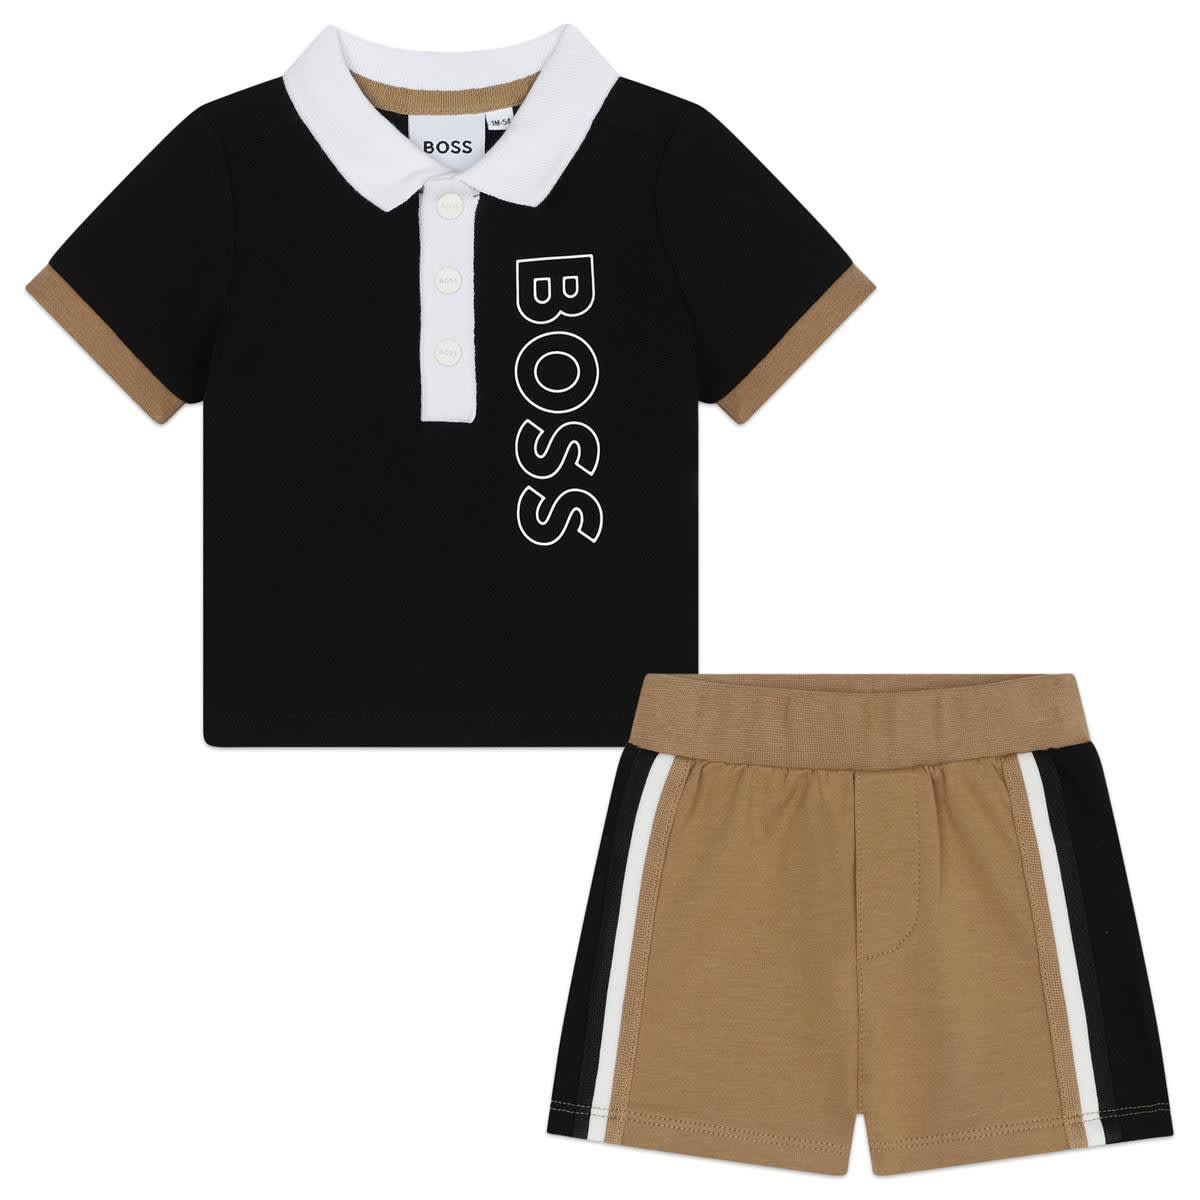 Hugo Boss Babies' Completo Con Stampa In Black